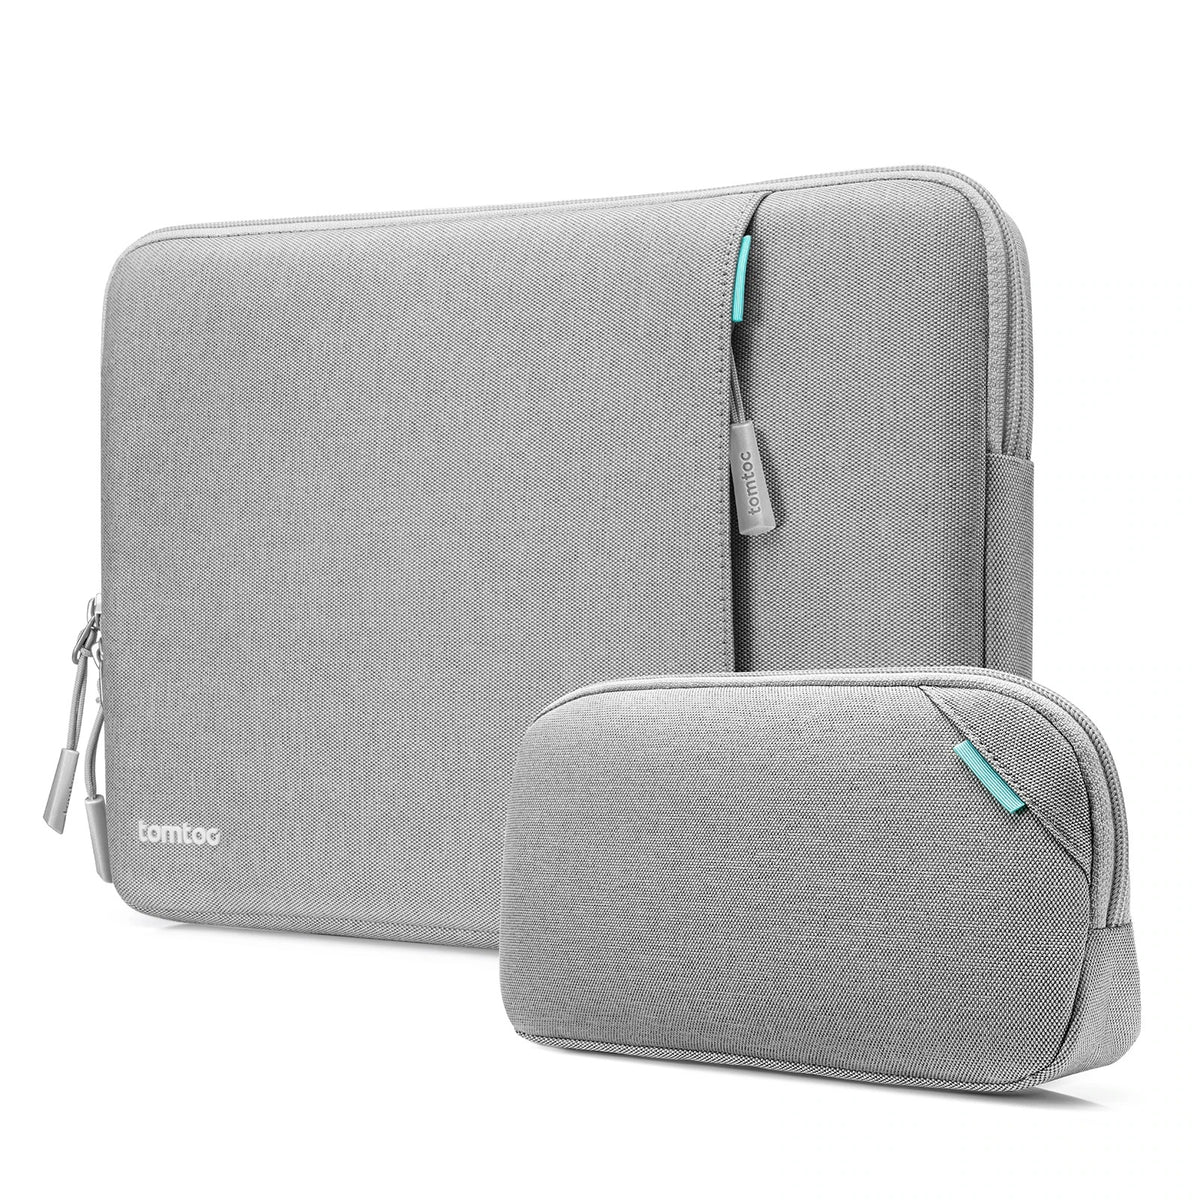 tomtoc 13 Inch Versatile 360 Protective Laptop Sleeve with Pouch - Gray